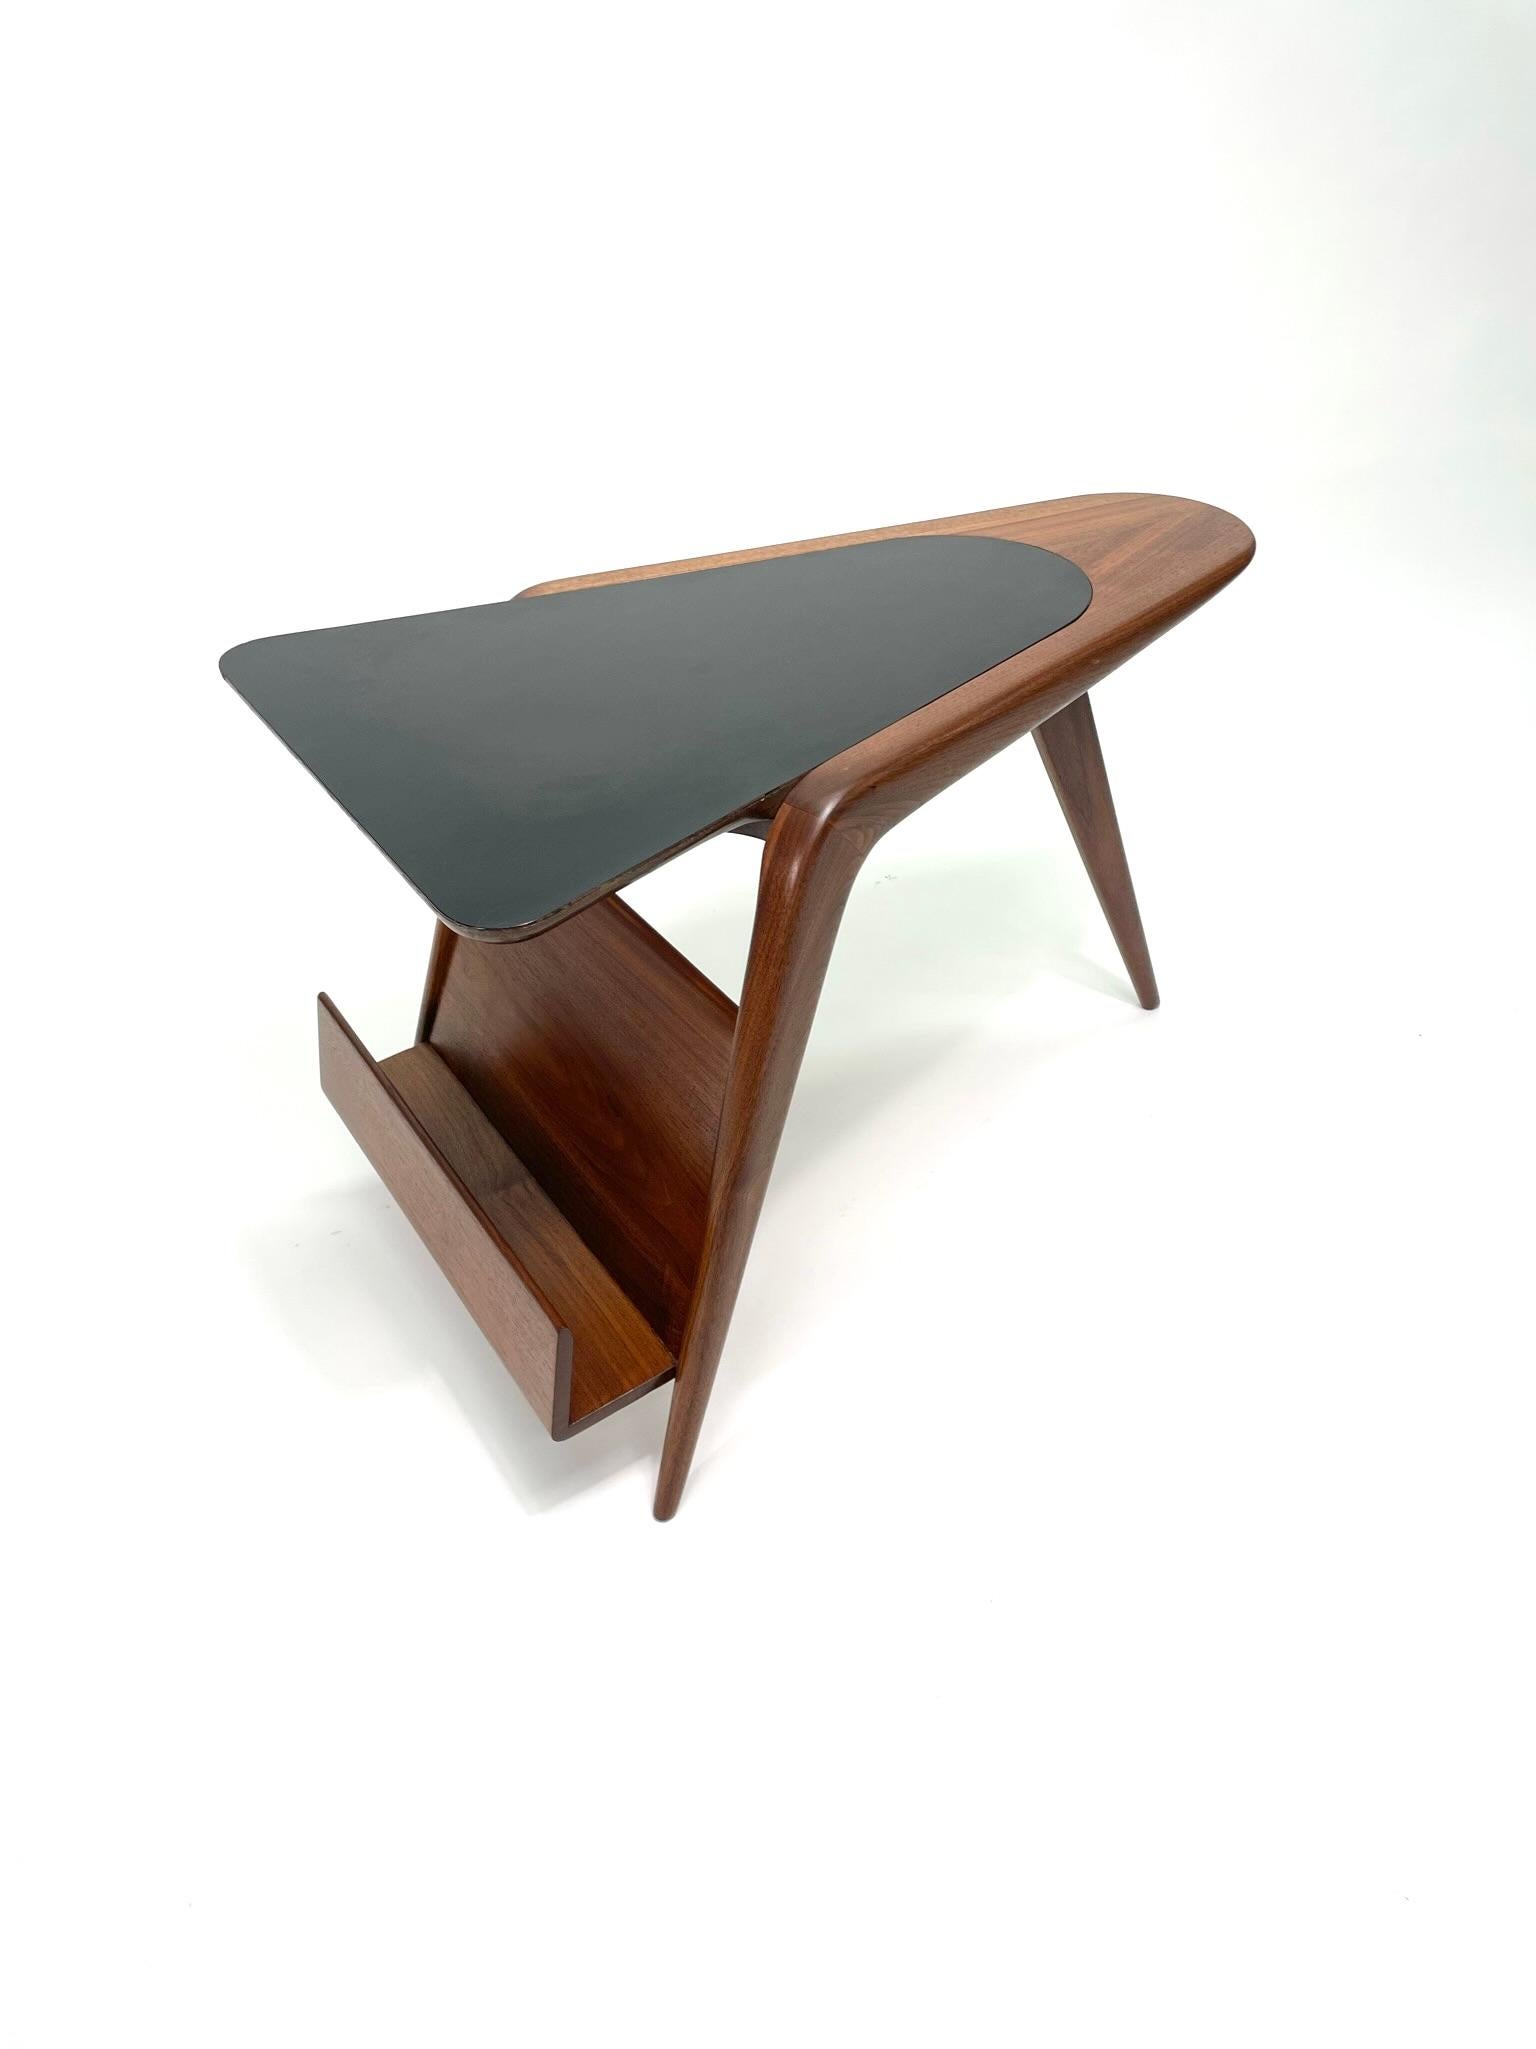 A very rare Kagan Occasional Walnut Side Table, circa 1950s. With a triangular wedge black laminate top and a walnut base with lower magazine shelf, this side table brings functional art to life. Featured a unique tripod base with Kagan's iconic